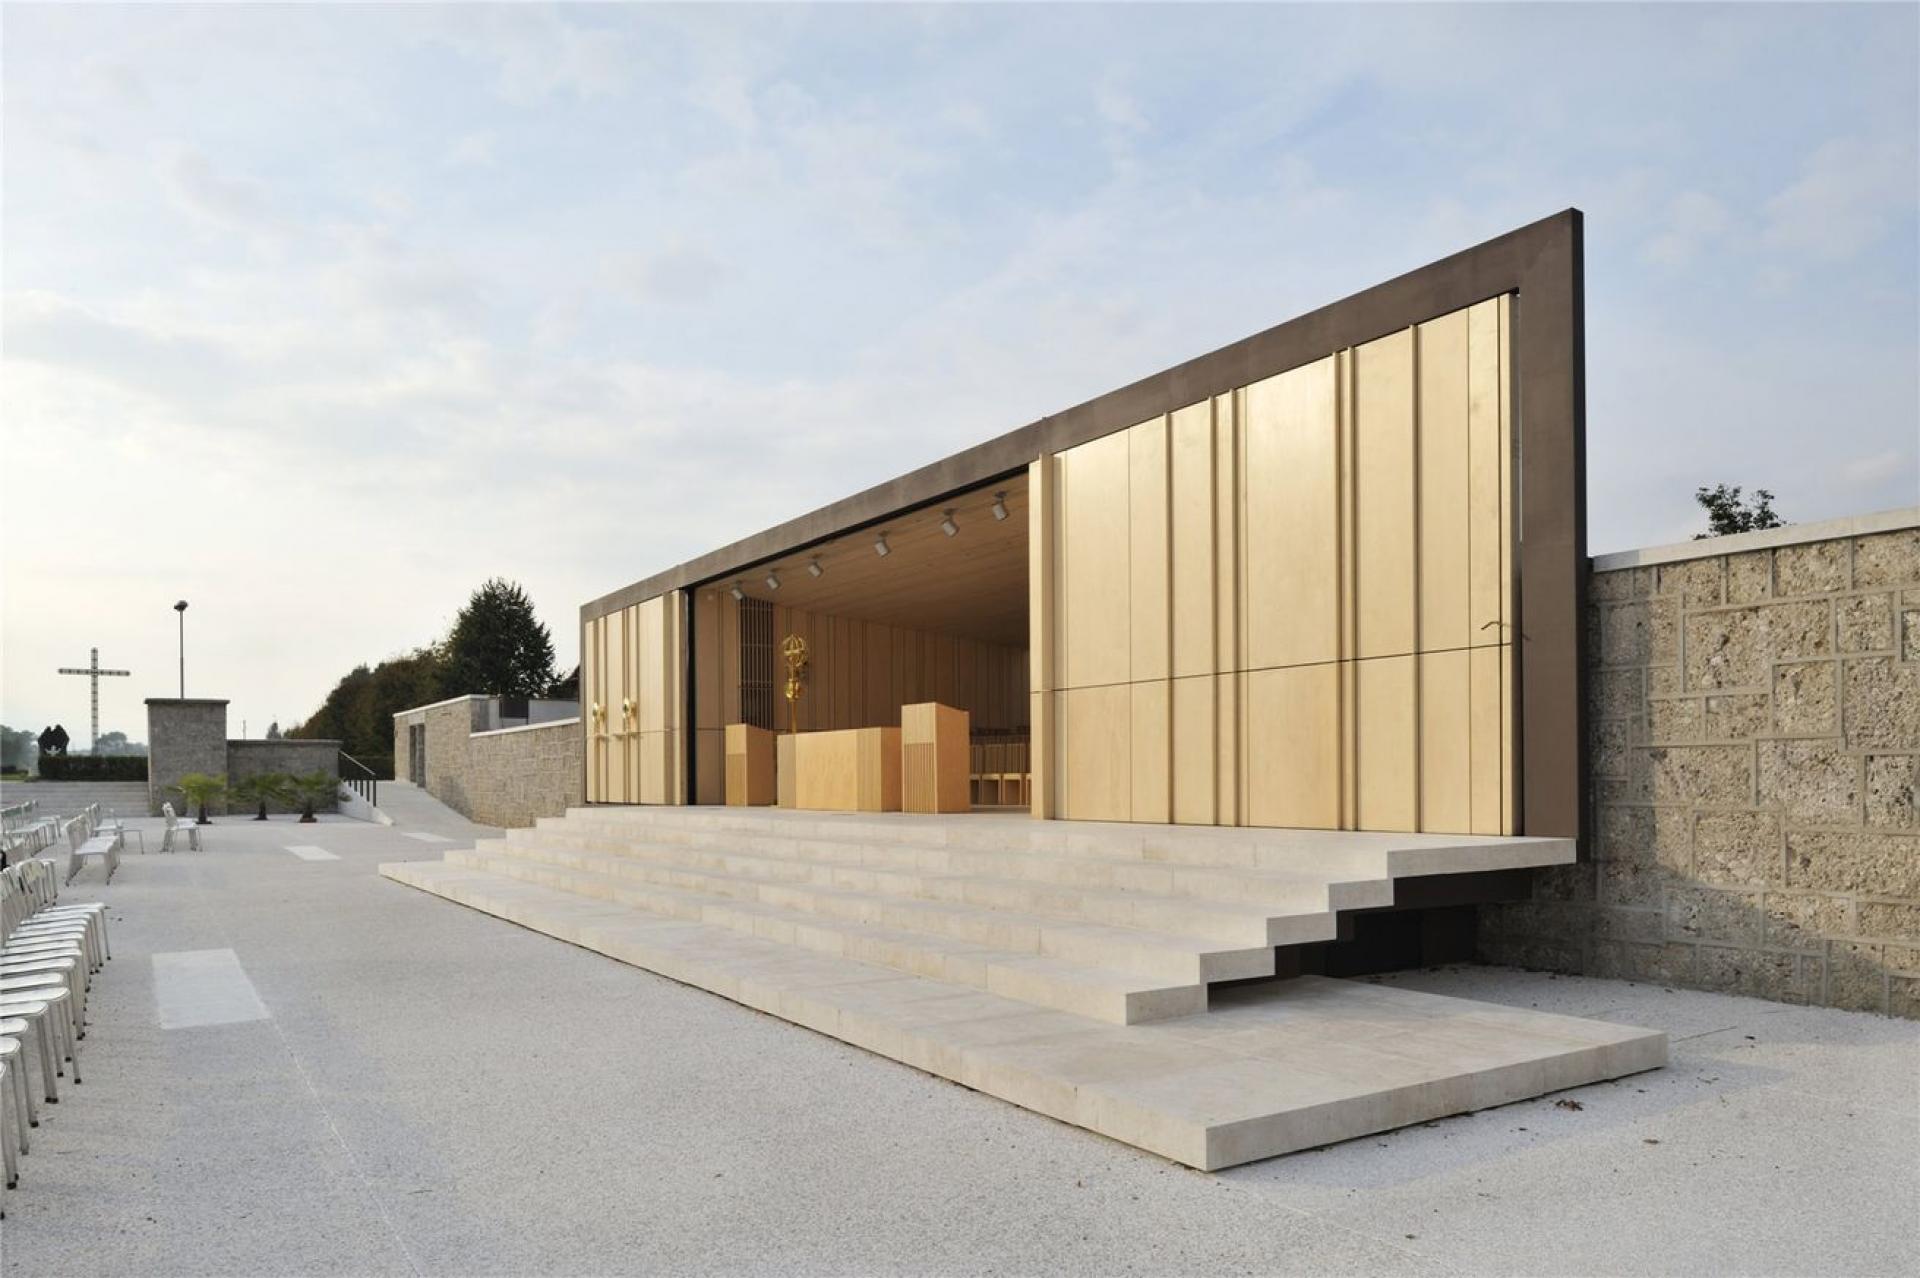 Marusa Zorec created a wall as a supporting element for the new structures of the chapel.